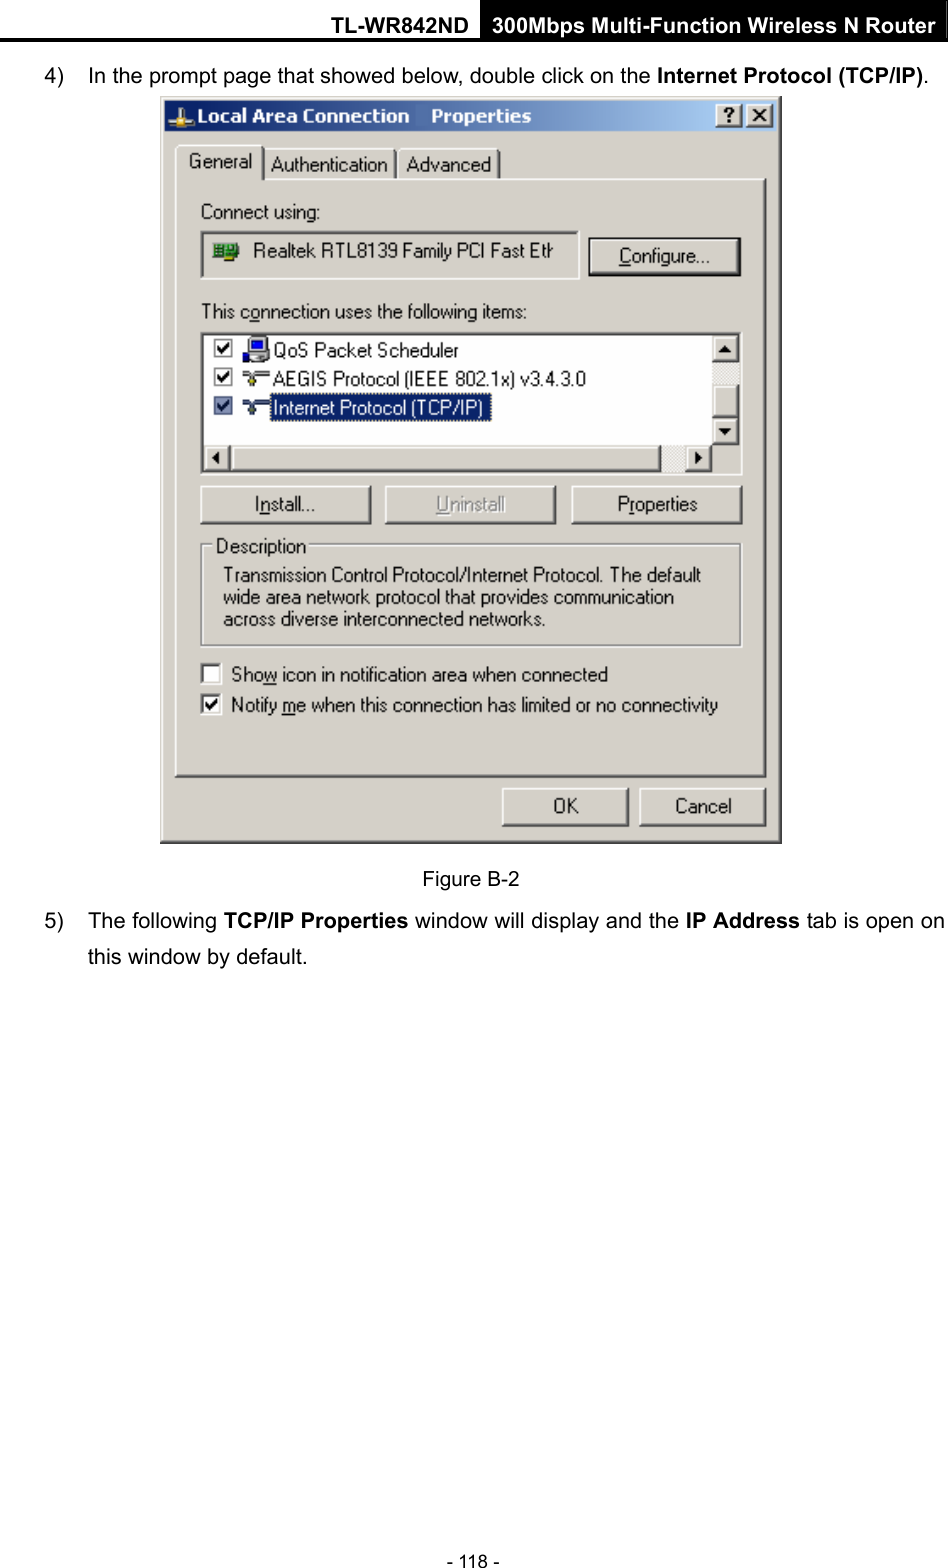 TL-WR842ND 300Mbps Multi-Function Wireless N Router - 118 - 4)  In the prompt page that showed below, double click on the Internet Protocol (TCP/IP).  Figure B-2 5) The following TCP/IP Properties window will display and the IP Address tab is open on this window by default. 